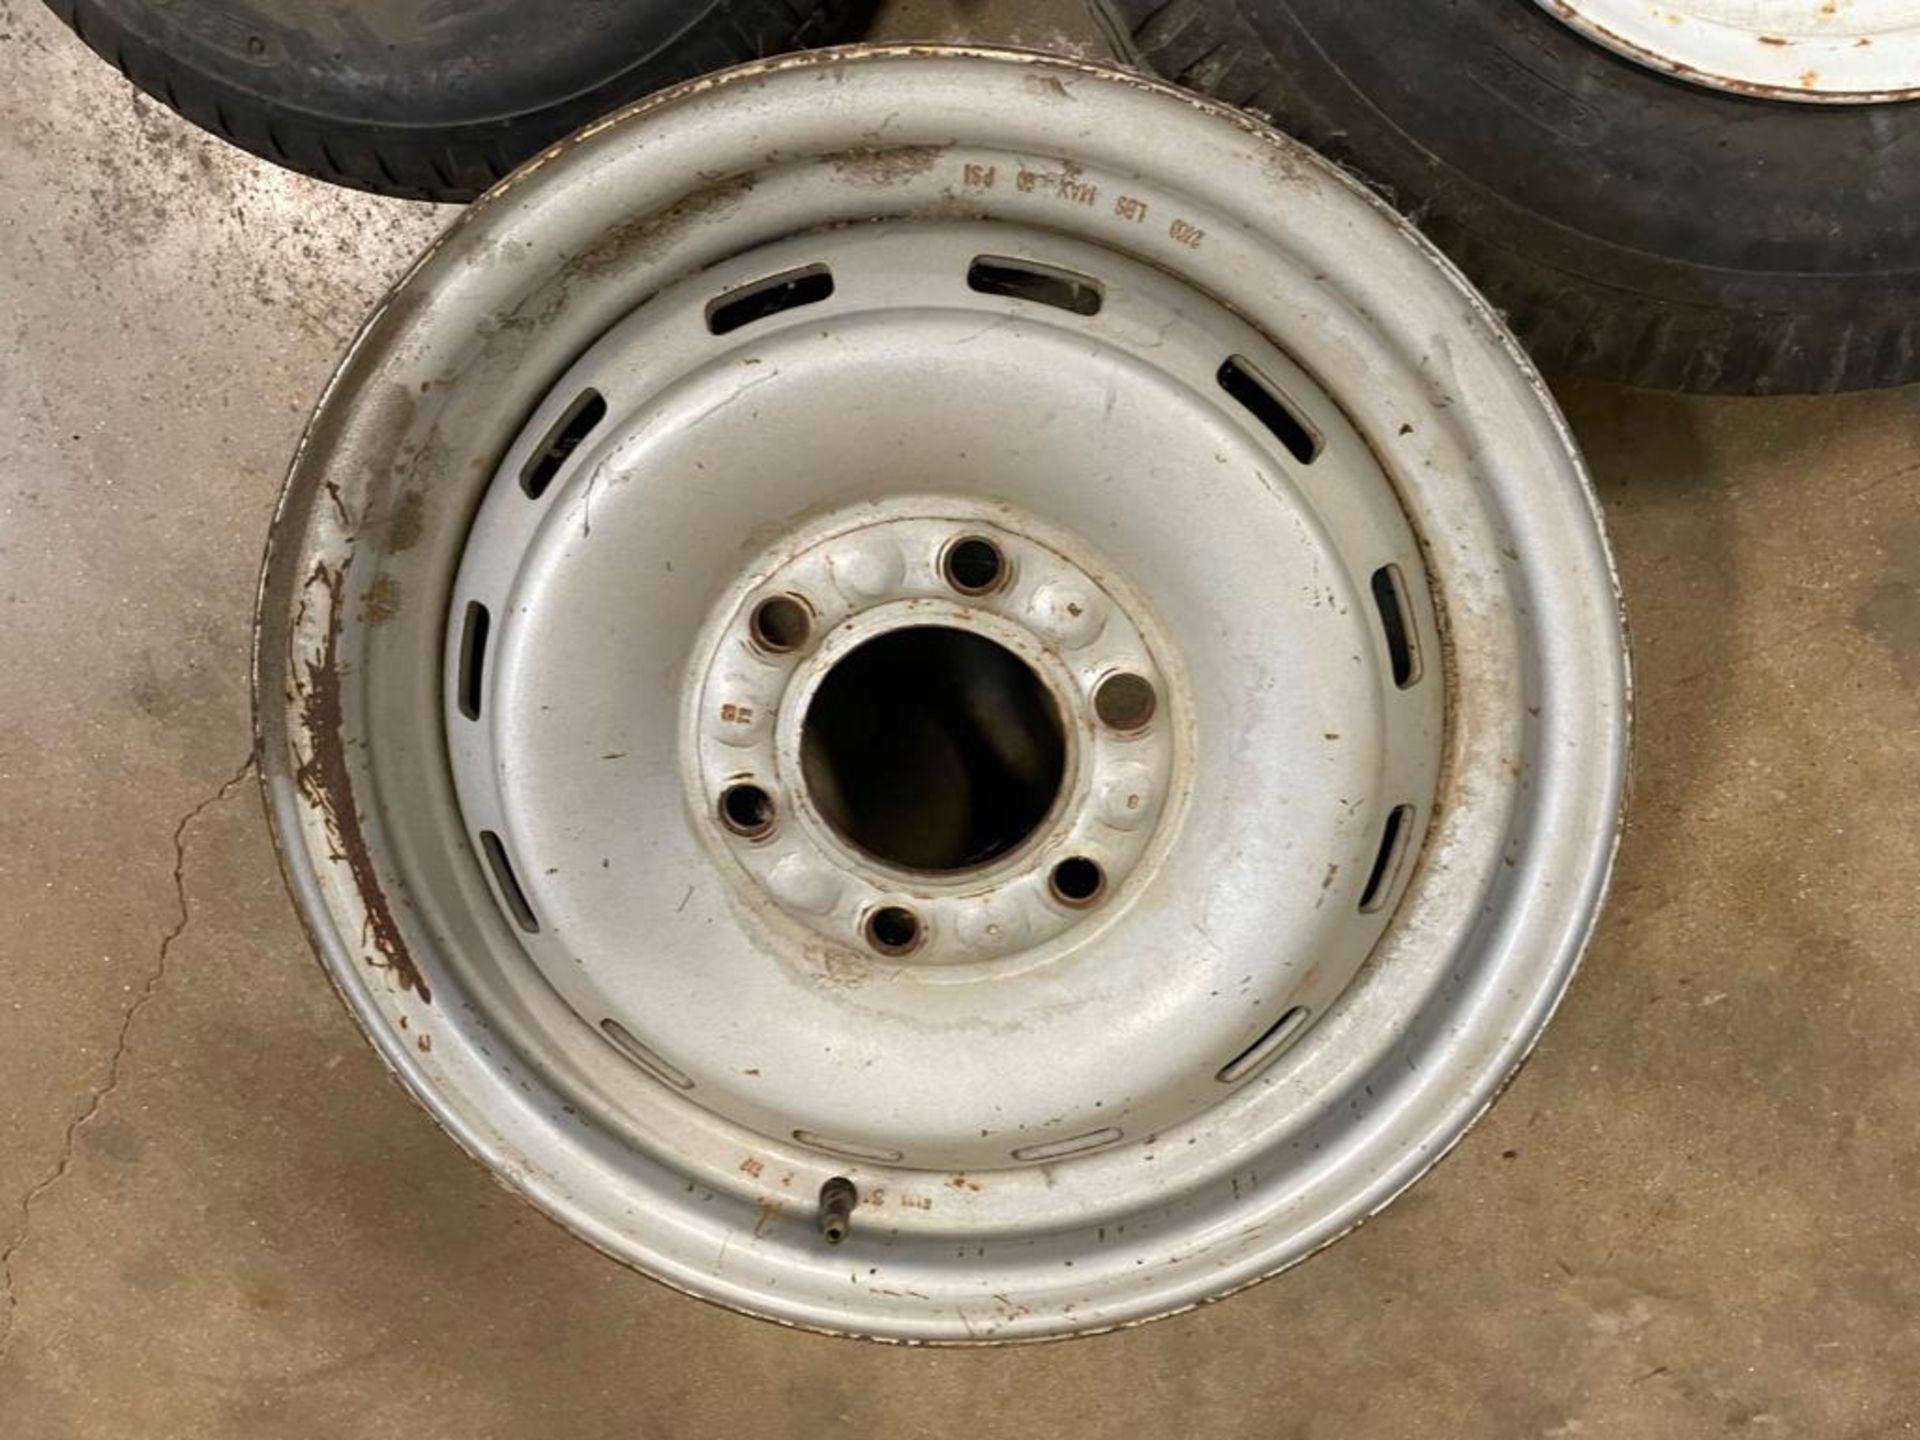 Tire 4.80/4.00-8, 6 Bolt Rim & Tire 5.30-12 with 5 Bolt Rim. Located in Hazelwood, MO - Image 7 of 9